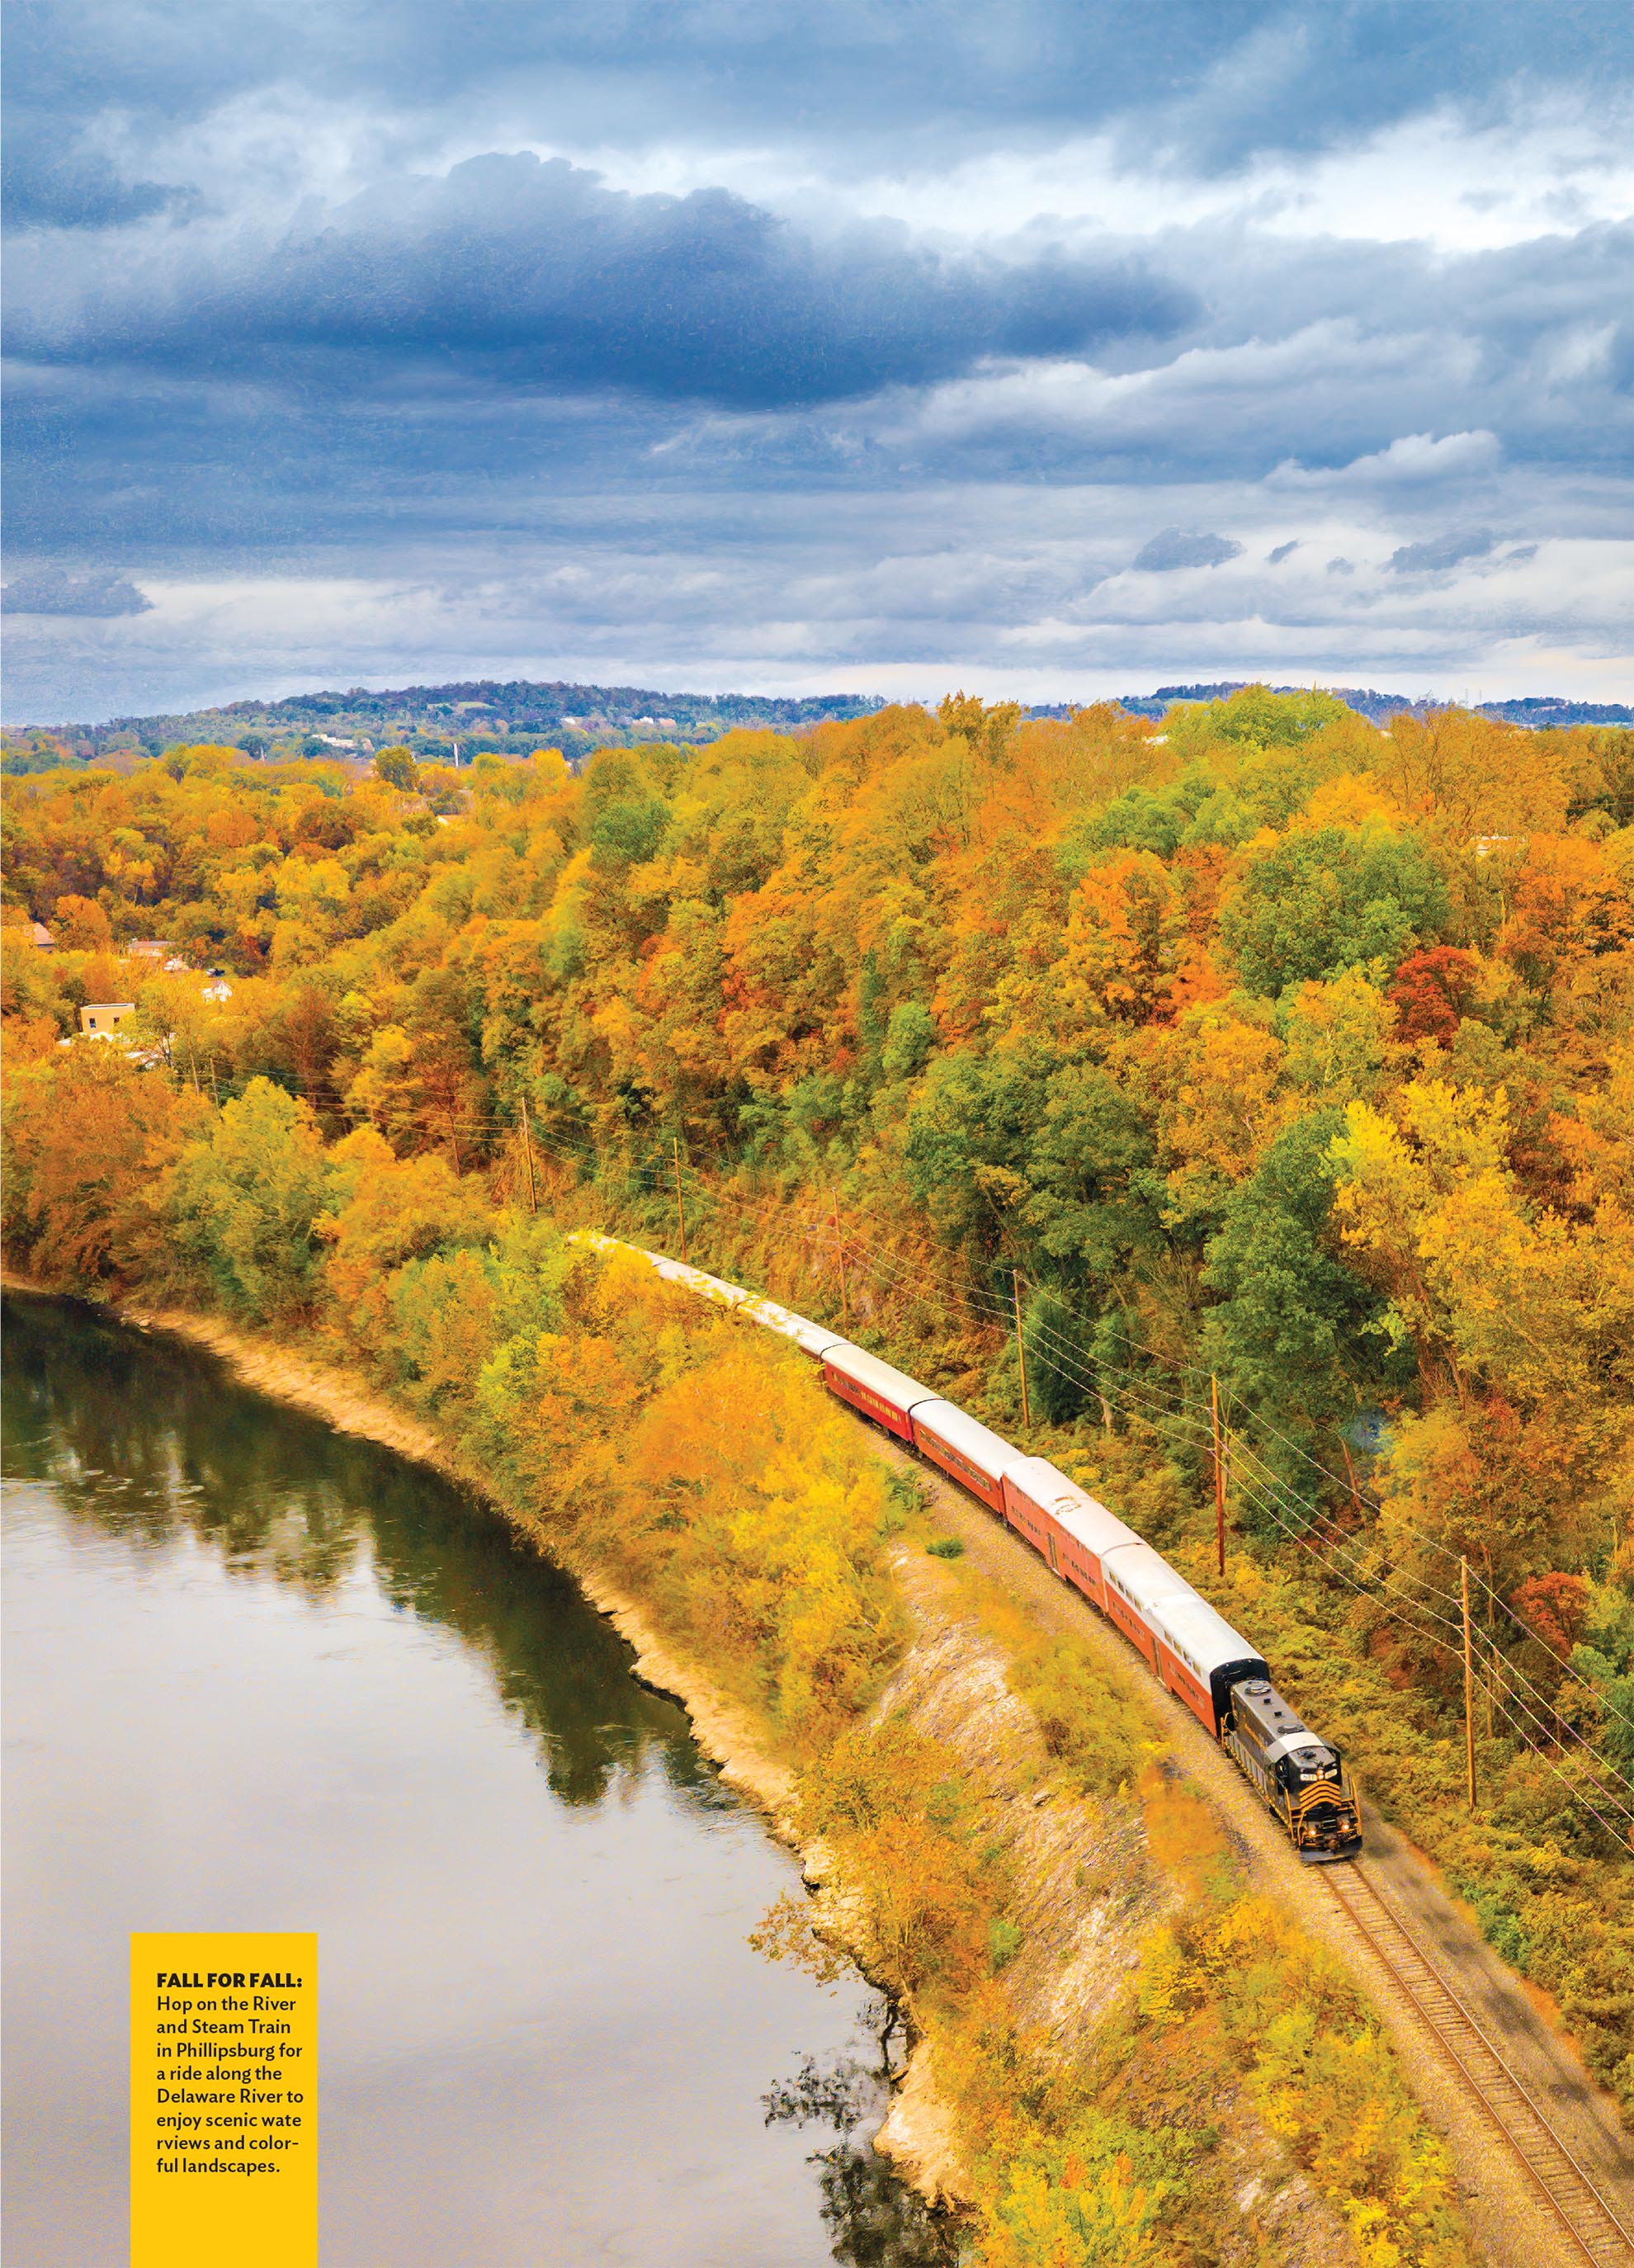 Photo in New Jersey Monthly Magazine of a train in the Fall taken with a Drone